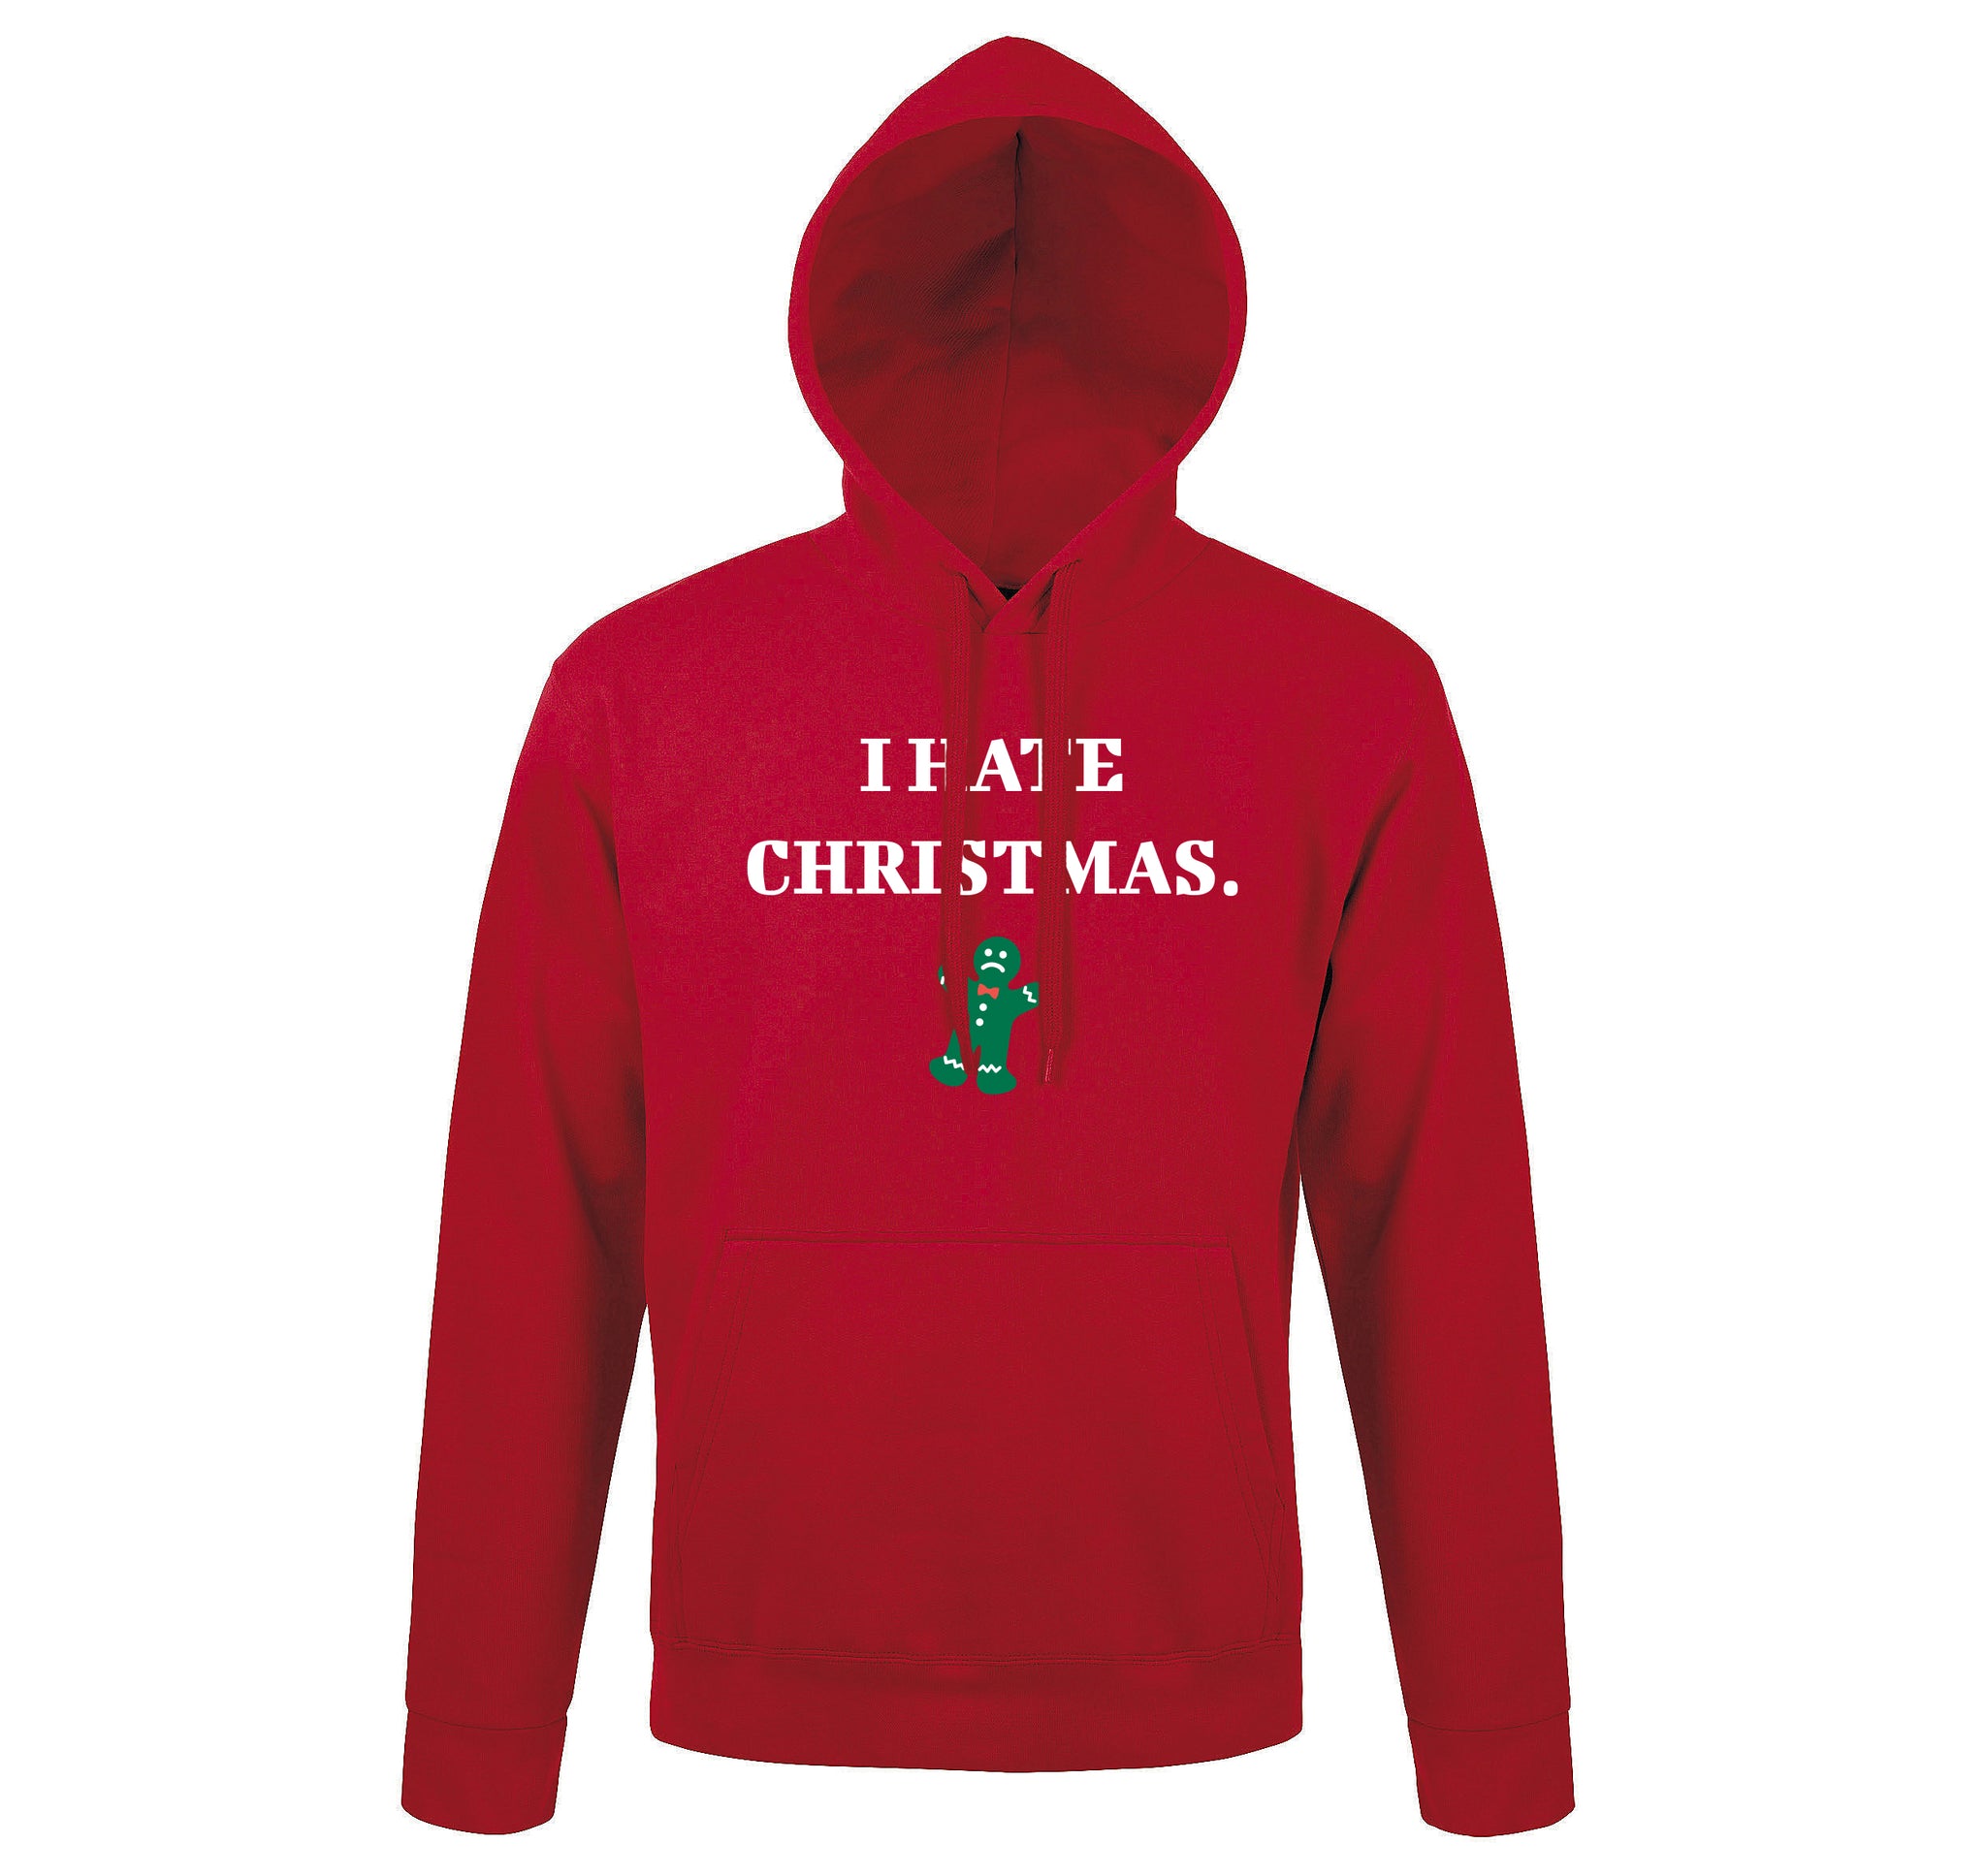 I hate christmas - Hoodie Deluxe Rouge-Sweat shirts-Atelier Amelot